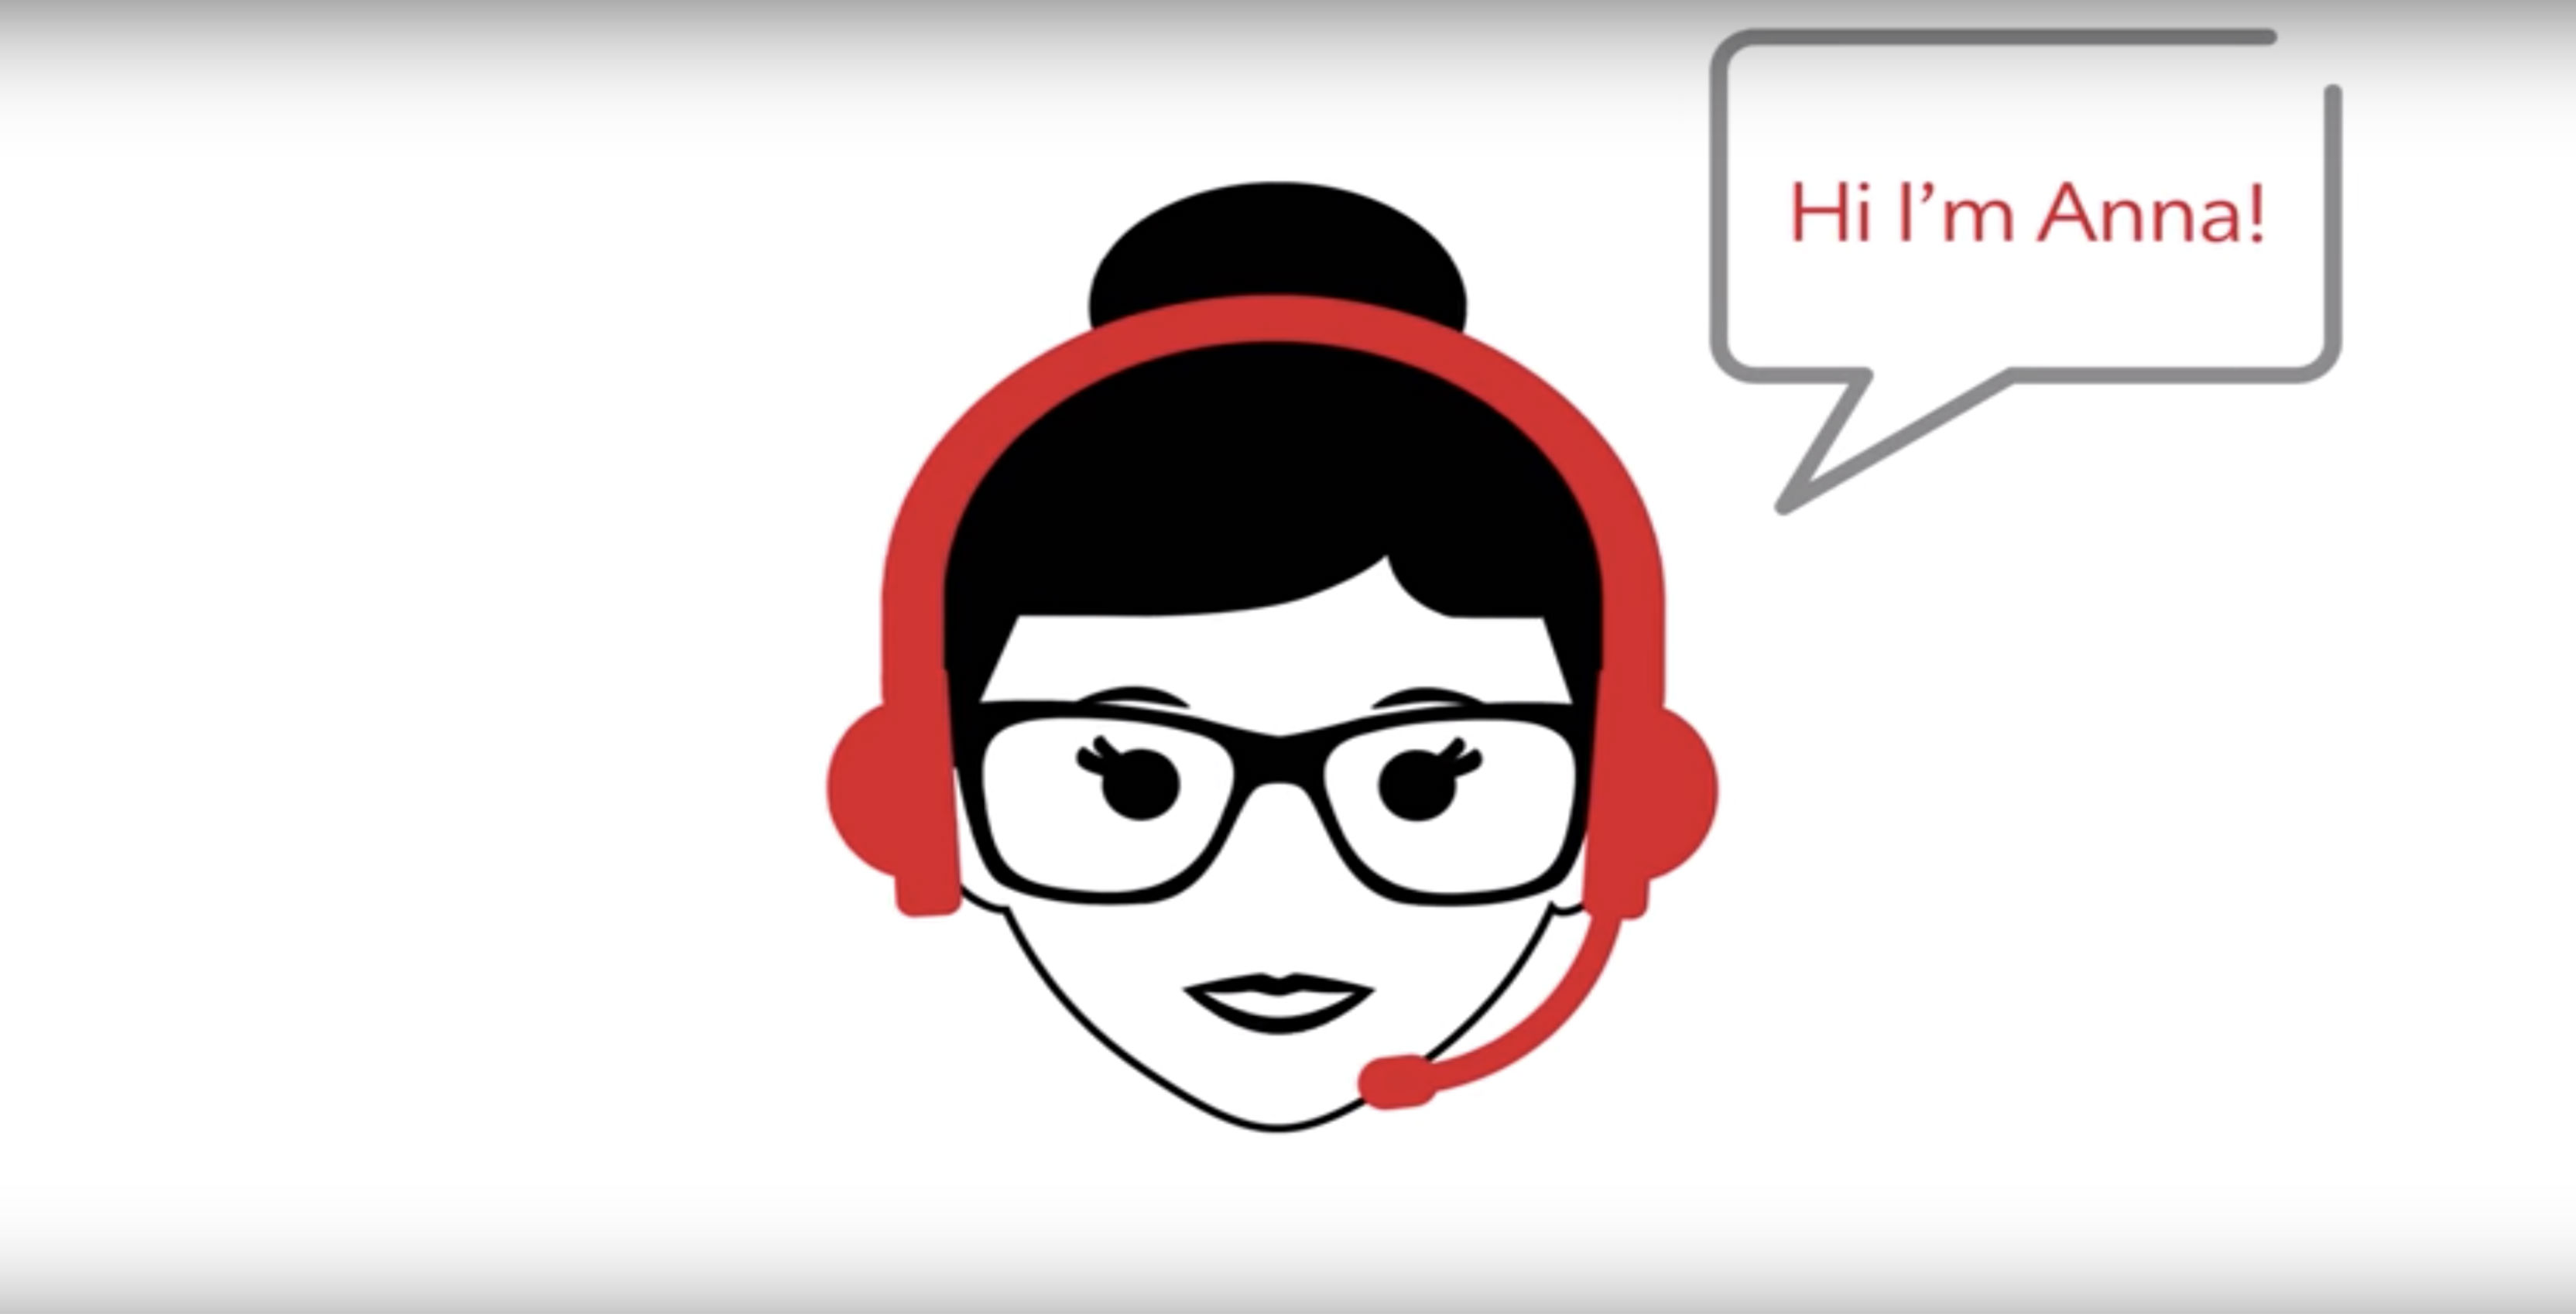 Rogers has a new virtual assistant